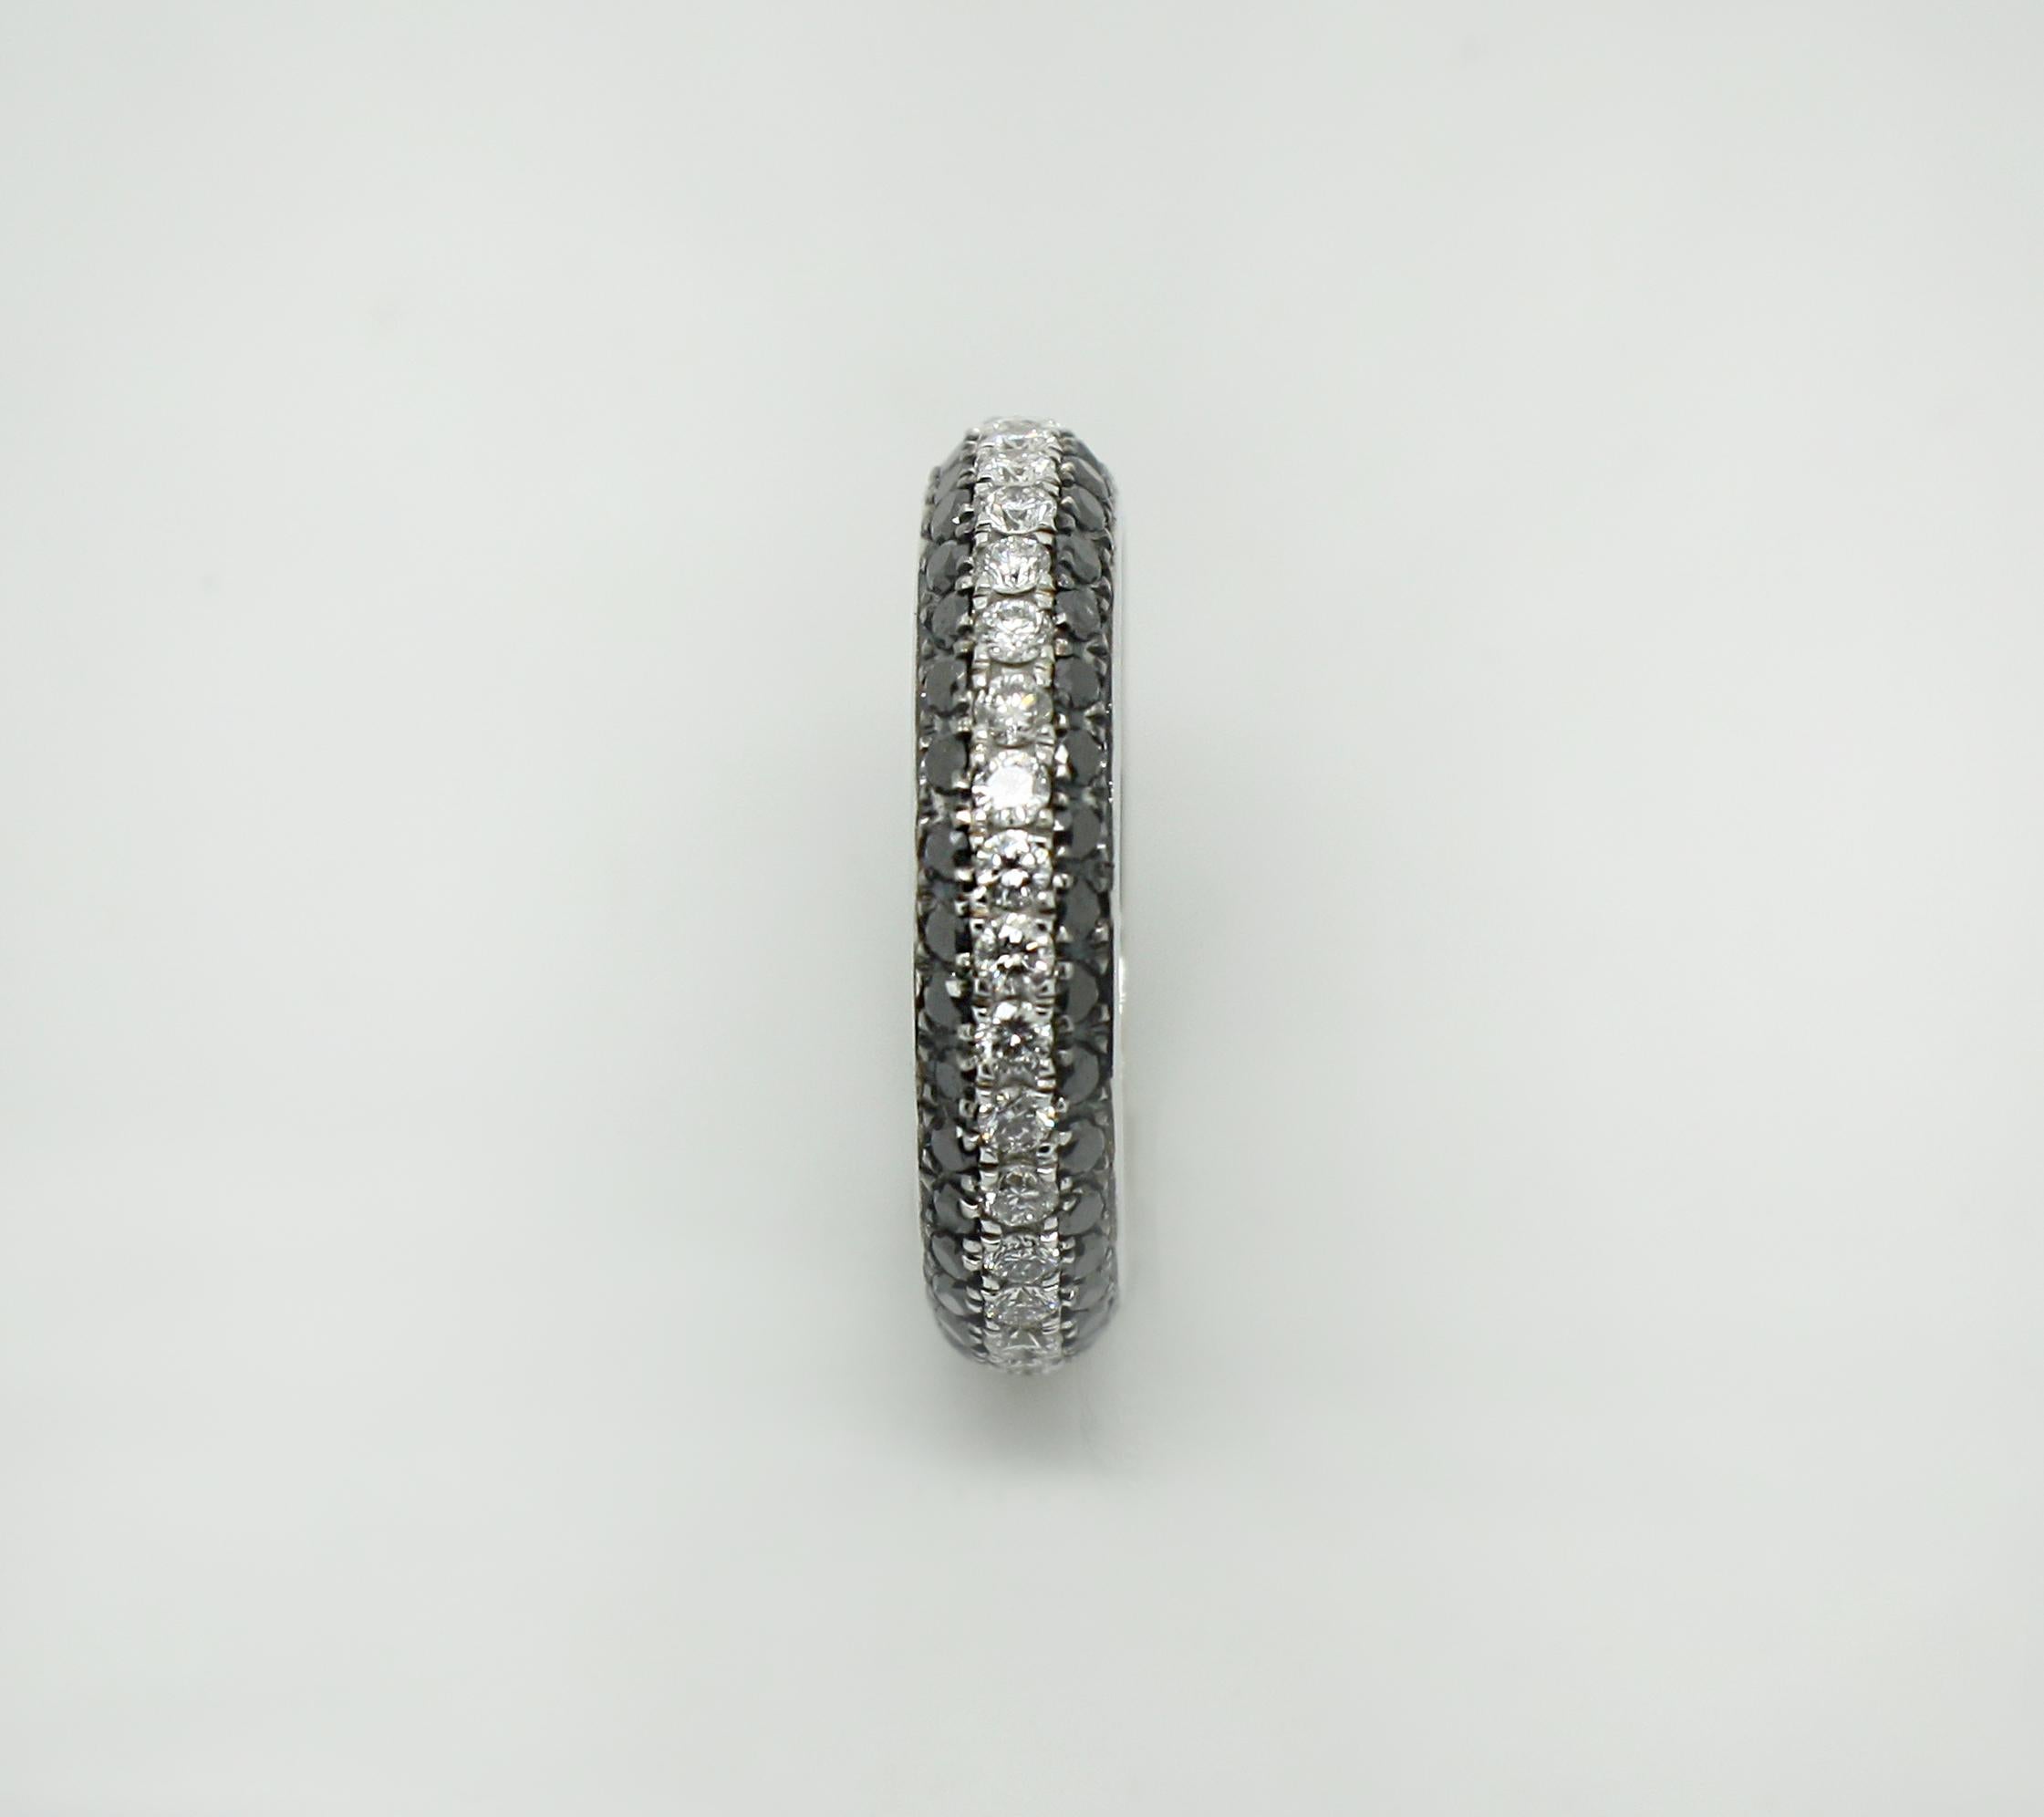 This S.Georgios designer 18 Karat White Gold Band Ring is all handmade in a unique two-tone look. The gorgeous band features brilliant cut white diamonds total weight of 0.78 Carat, and black diamonds total weight of 1.10 Carat which are set in